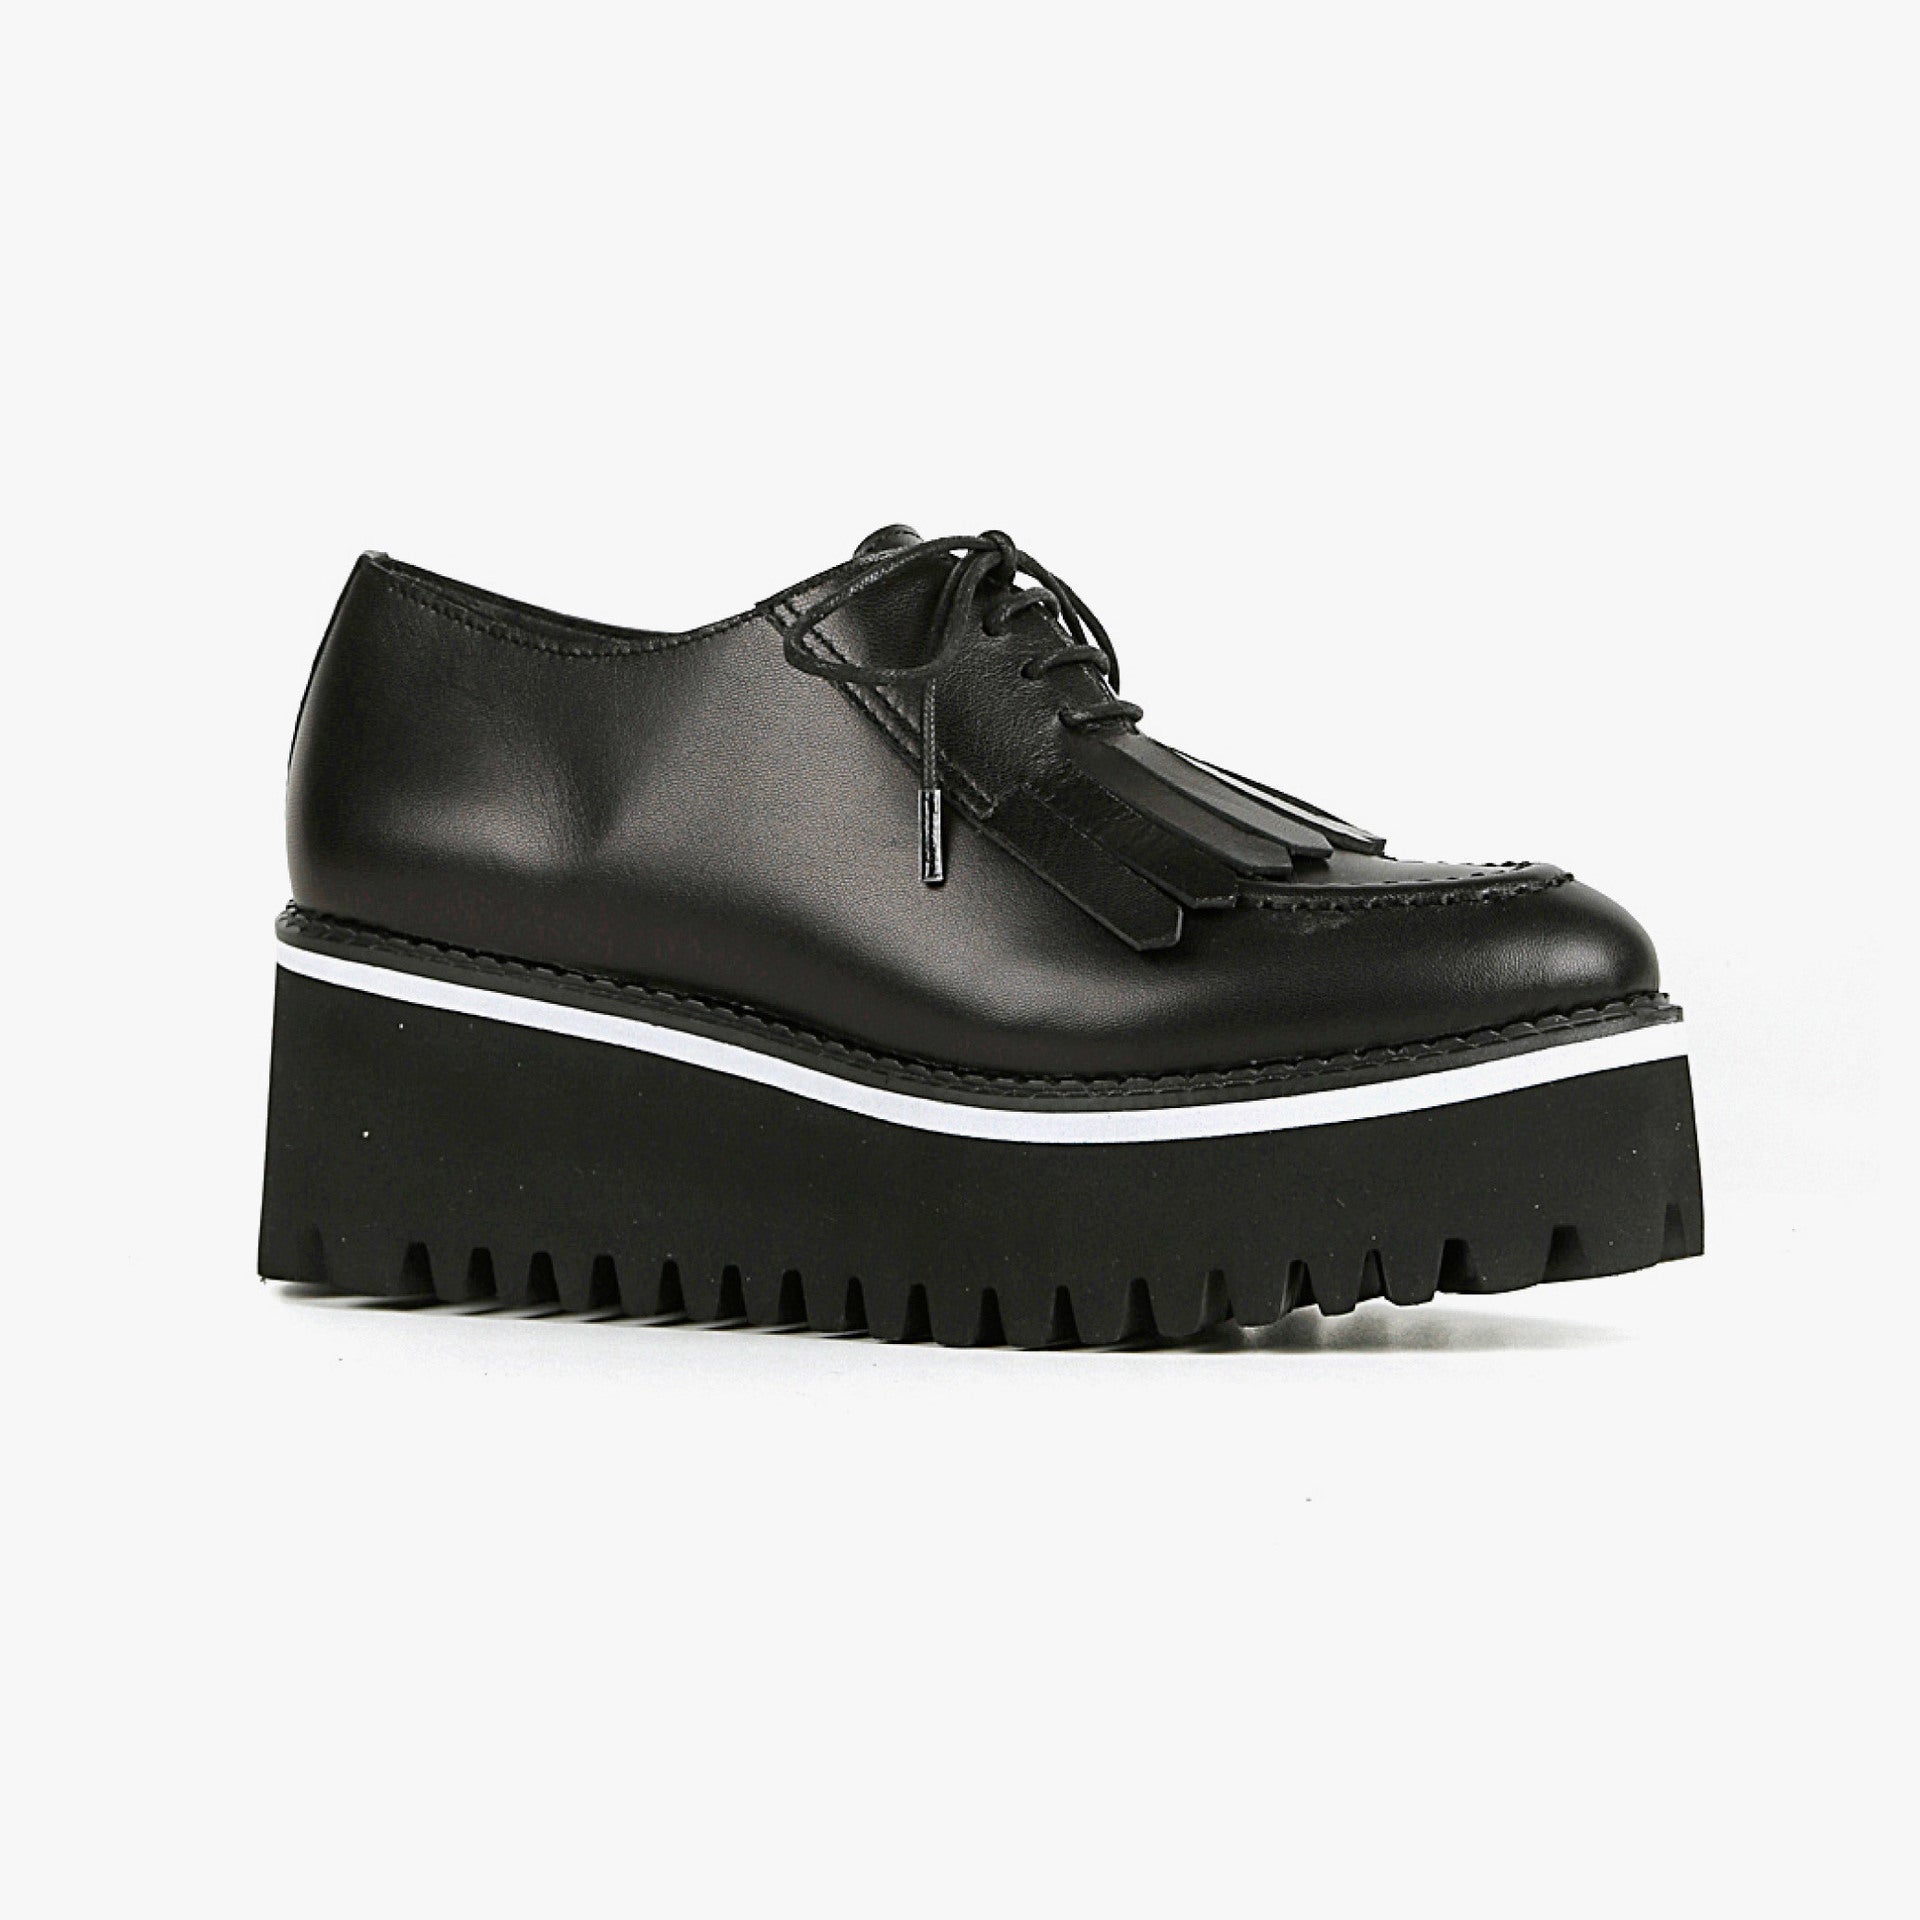 Outer side view of the all black footwear kiltie ox flatform. This shoe is black with a black platform sole and a lace up front. The sole and leather upper are separated by white piping around the shoe.